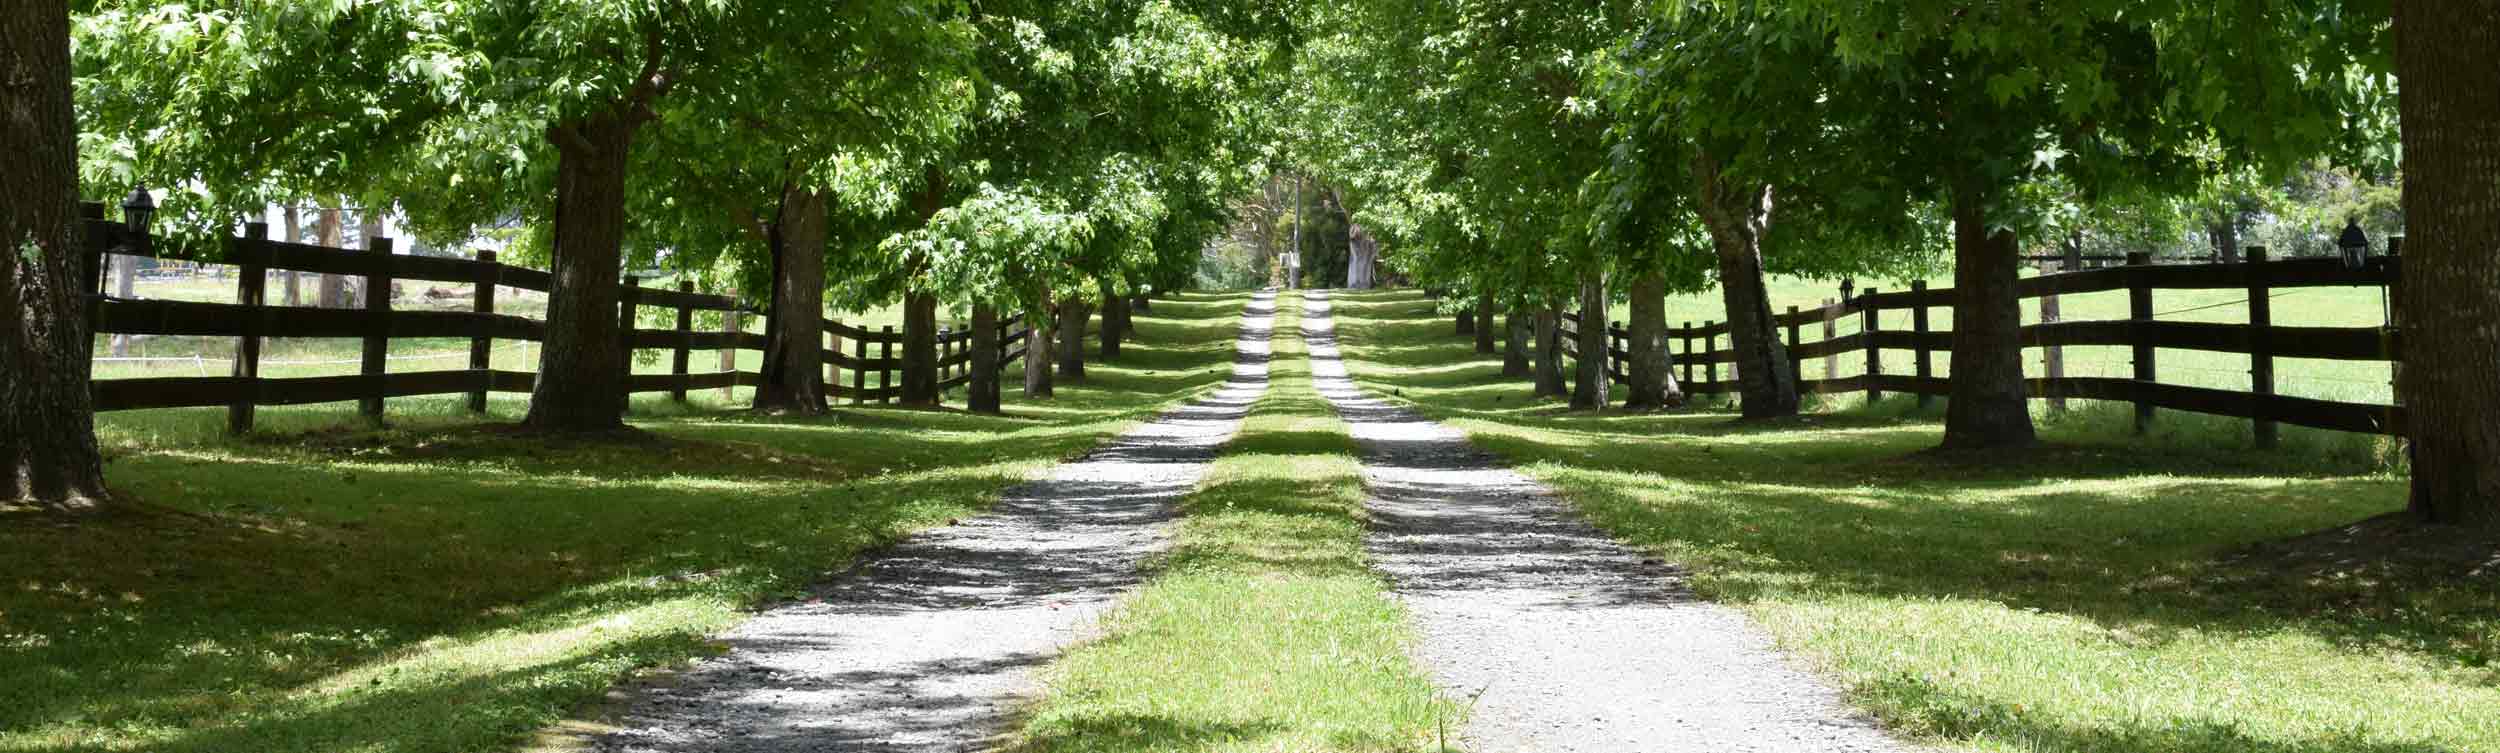 Fence along a country driveway by Finer Lawn & Landscaping